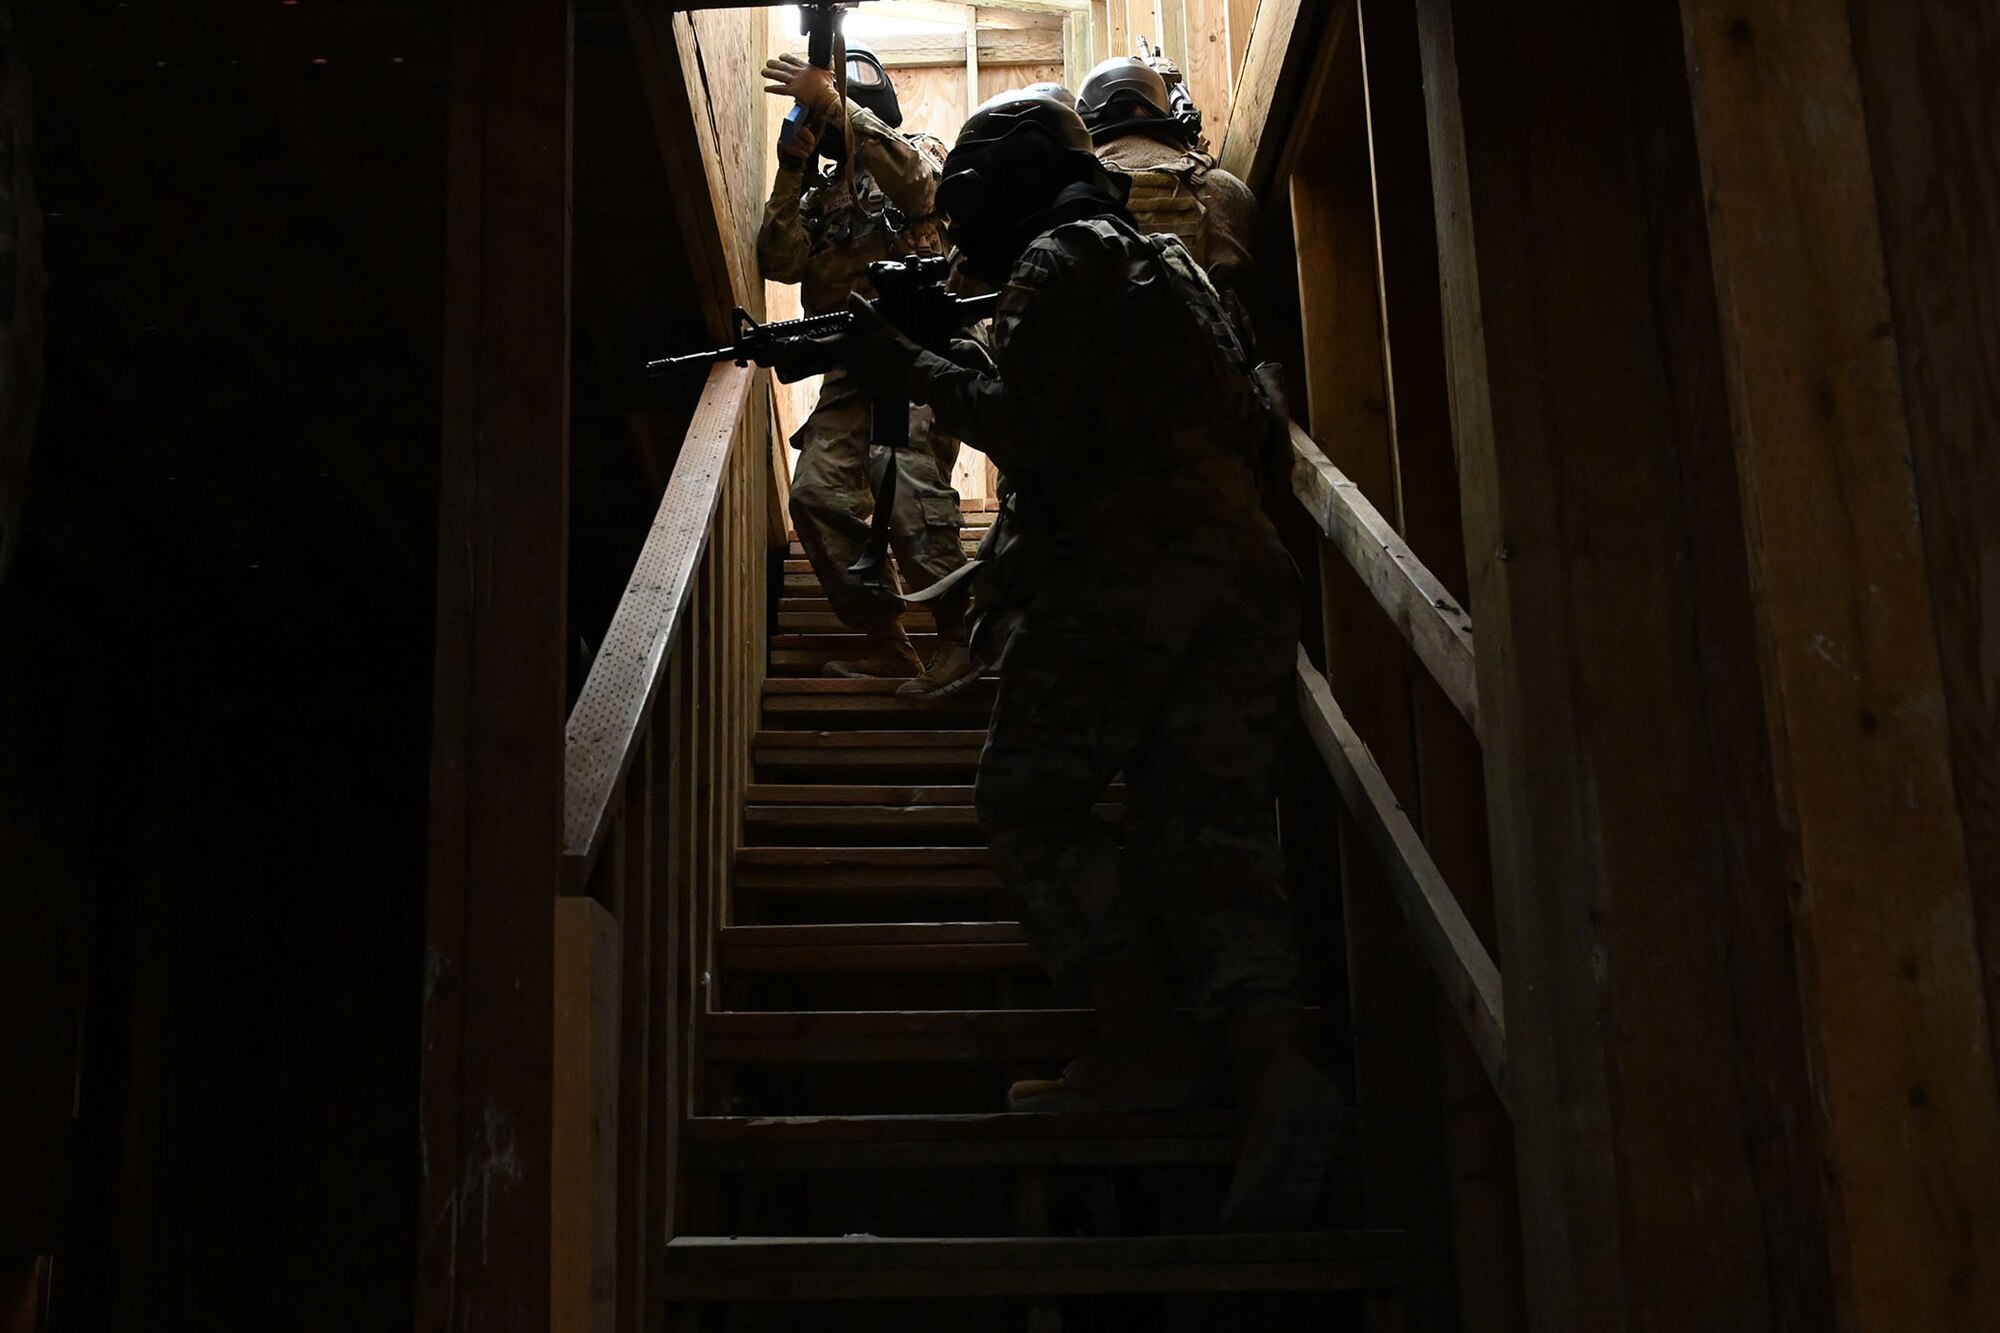 Defenders from the 841st Missile Security Forces Squadron navigate a dark staircase during a breaching exercise Aug. 17, 2021, at the firing range village on Fort Harrison, Mont. Simulated hostages and enemy combatants were inside the building, which required defenders to use critical weapon skills and decision-making while performing proper unit formations. (U.S. Air Force photo by Airman Elijah Van Zandt)